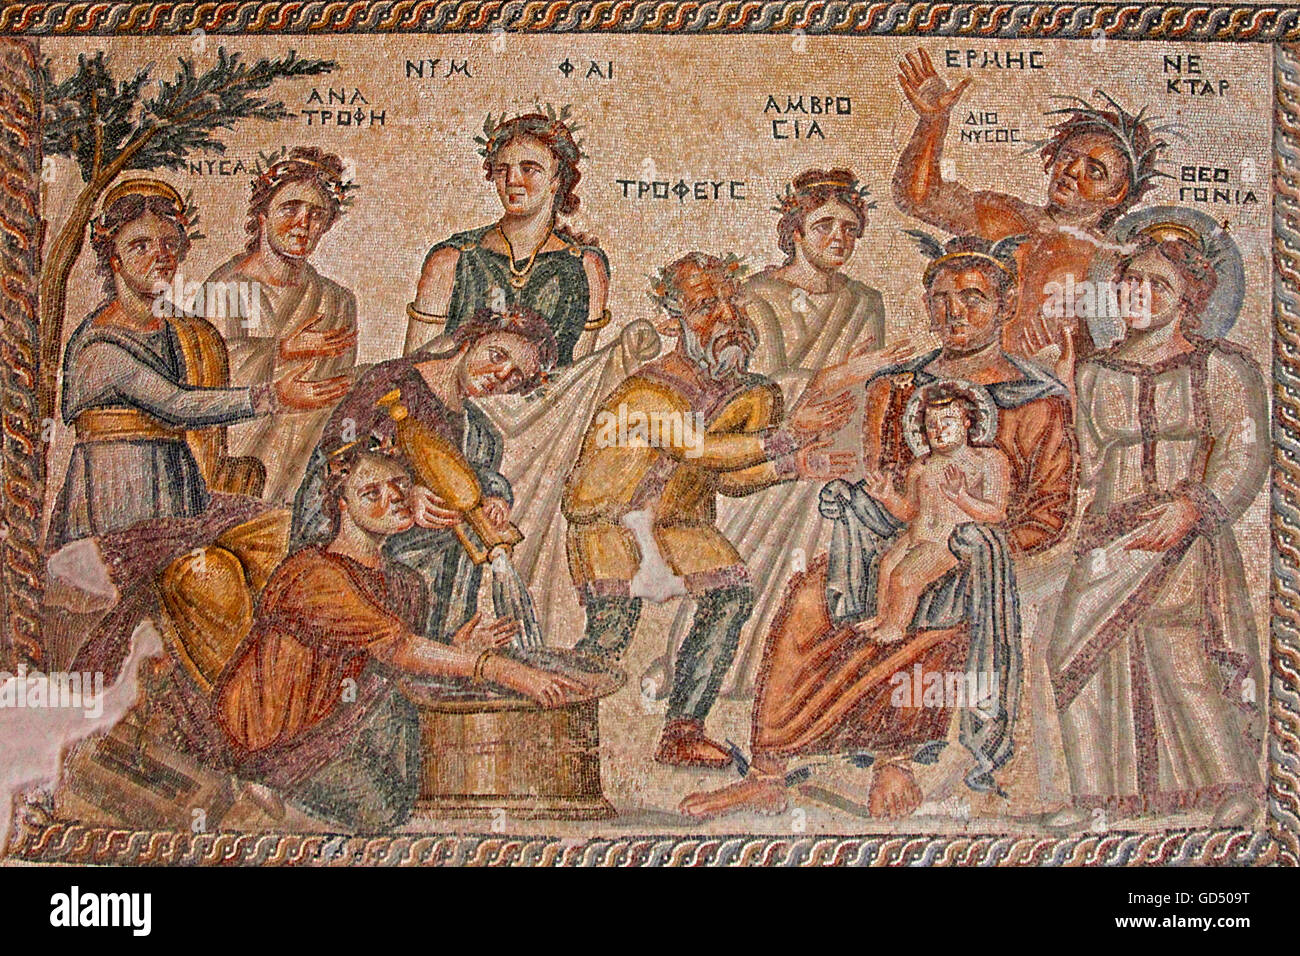 Mosaicn The scene represents the moment at which baby Dionysos, seated in the lap of Hermes, is about to be handed over to Tropheus, his future tutor, and to the nymphs of Mount Nysa, House of the Aion, Archaeological park of Paphos, Republic of Cyprus / Stock Photo